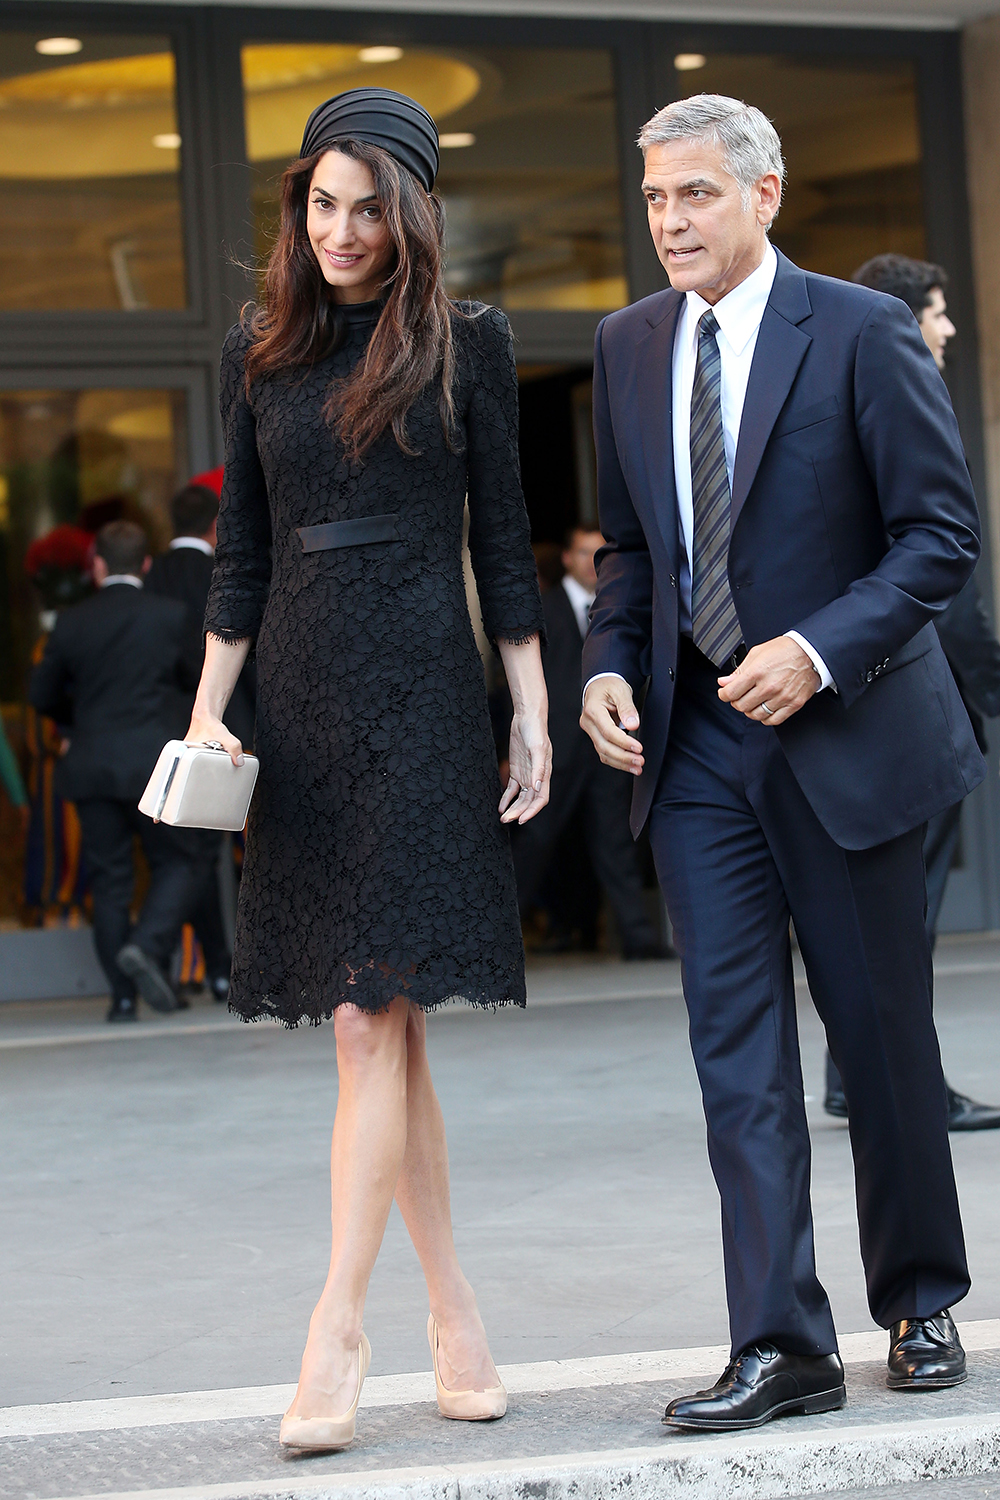 Amal Clooney looked elegant in a black Atelier Versace lace dress and silk hat with husband George Clooney for their meeting with Pope Francis at the Vatican.